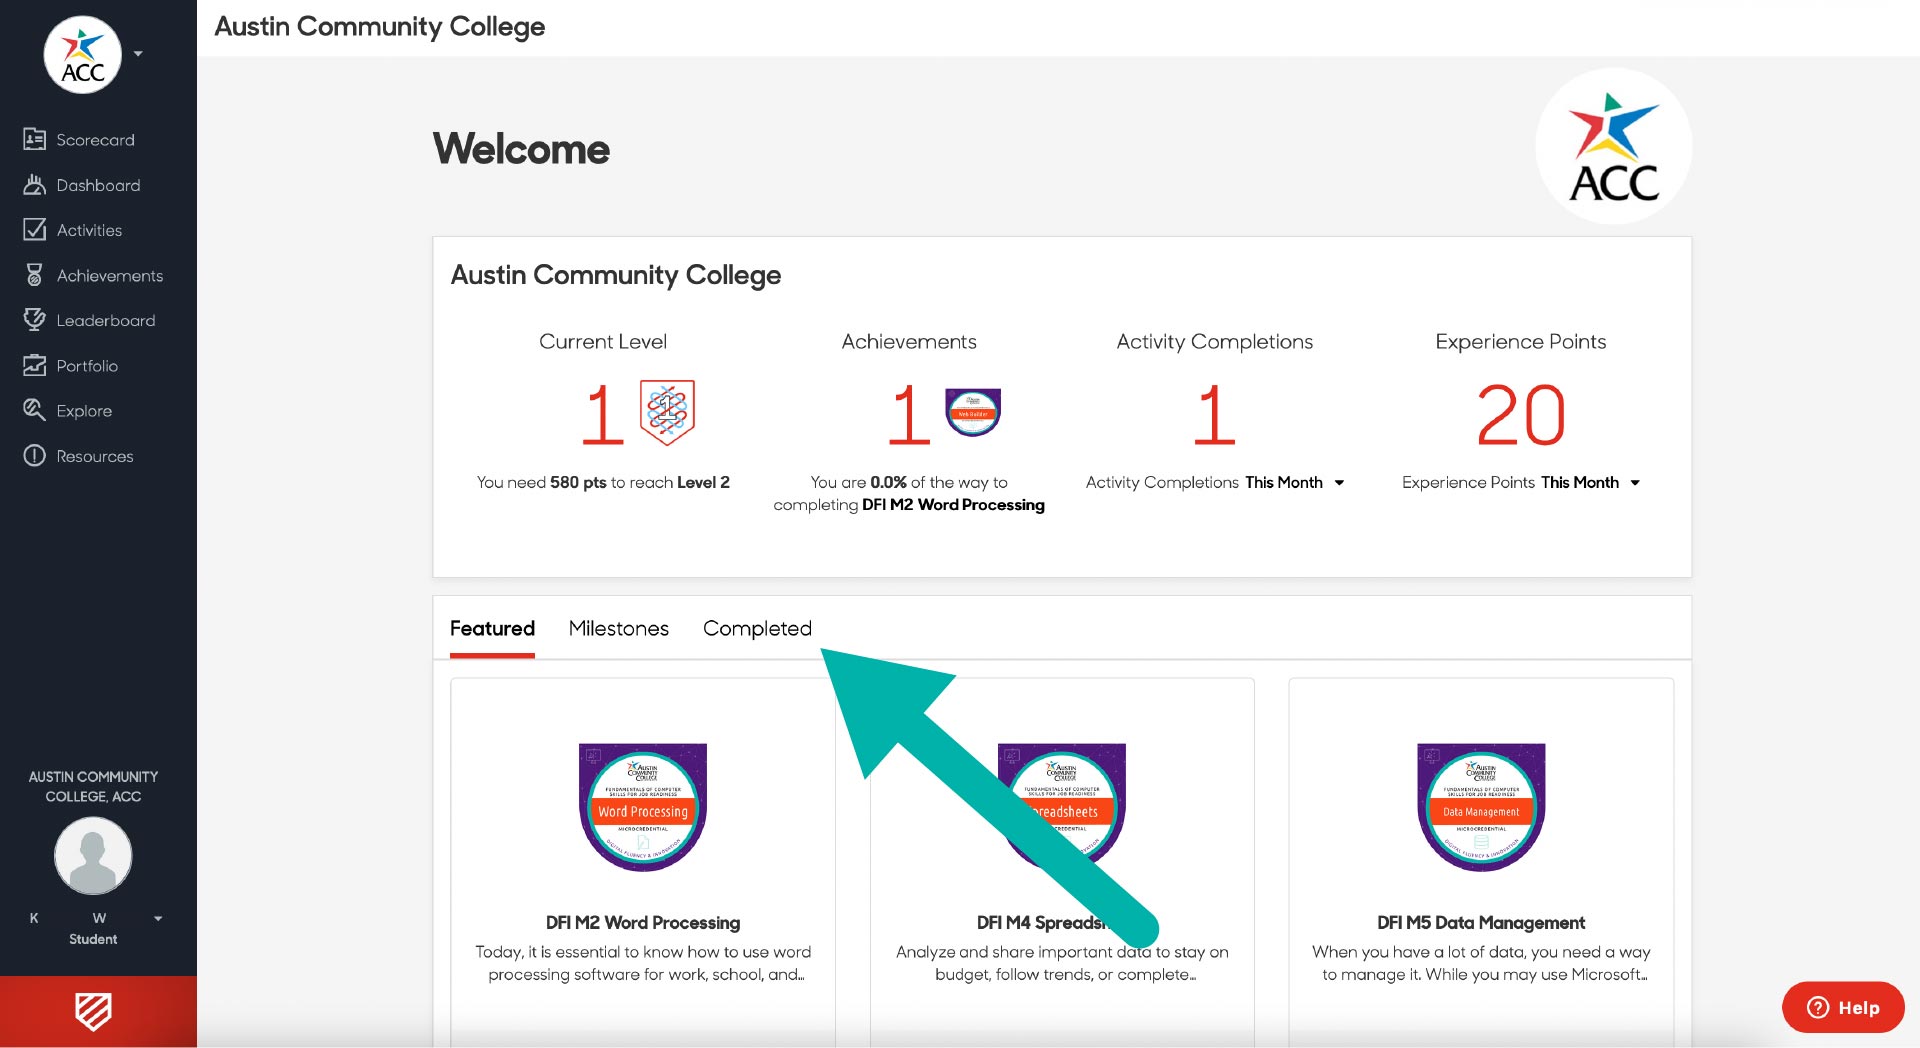 Screenshot of ACC student Suitable badge homepage with arrow showing student needs to click on "Completed" to view badges they have earned.